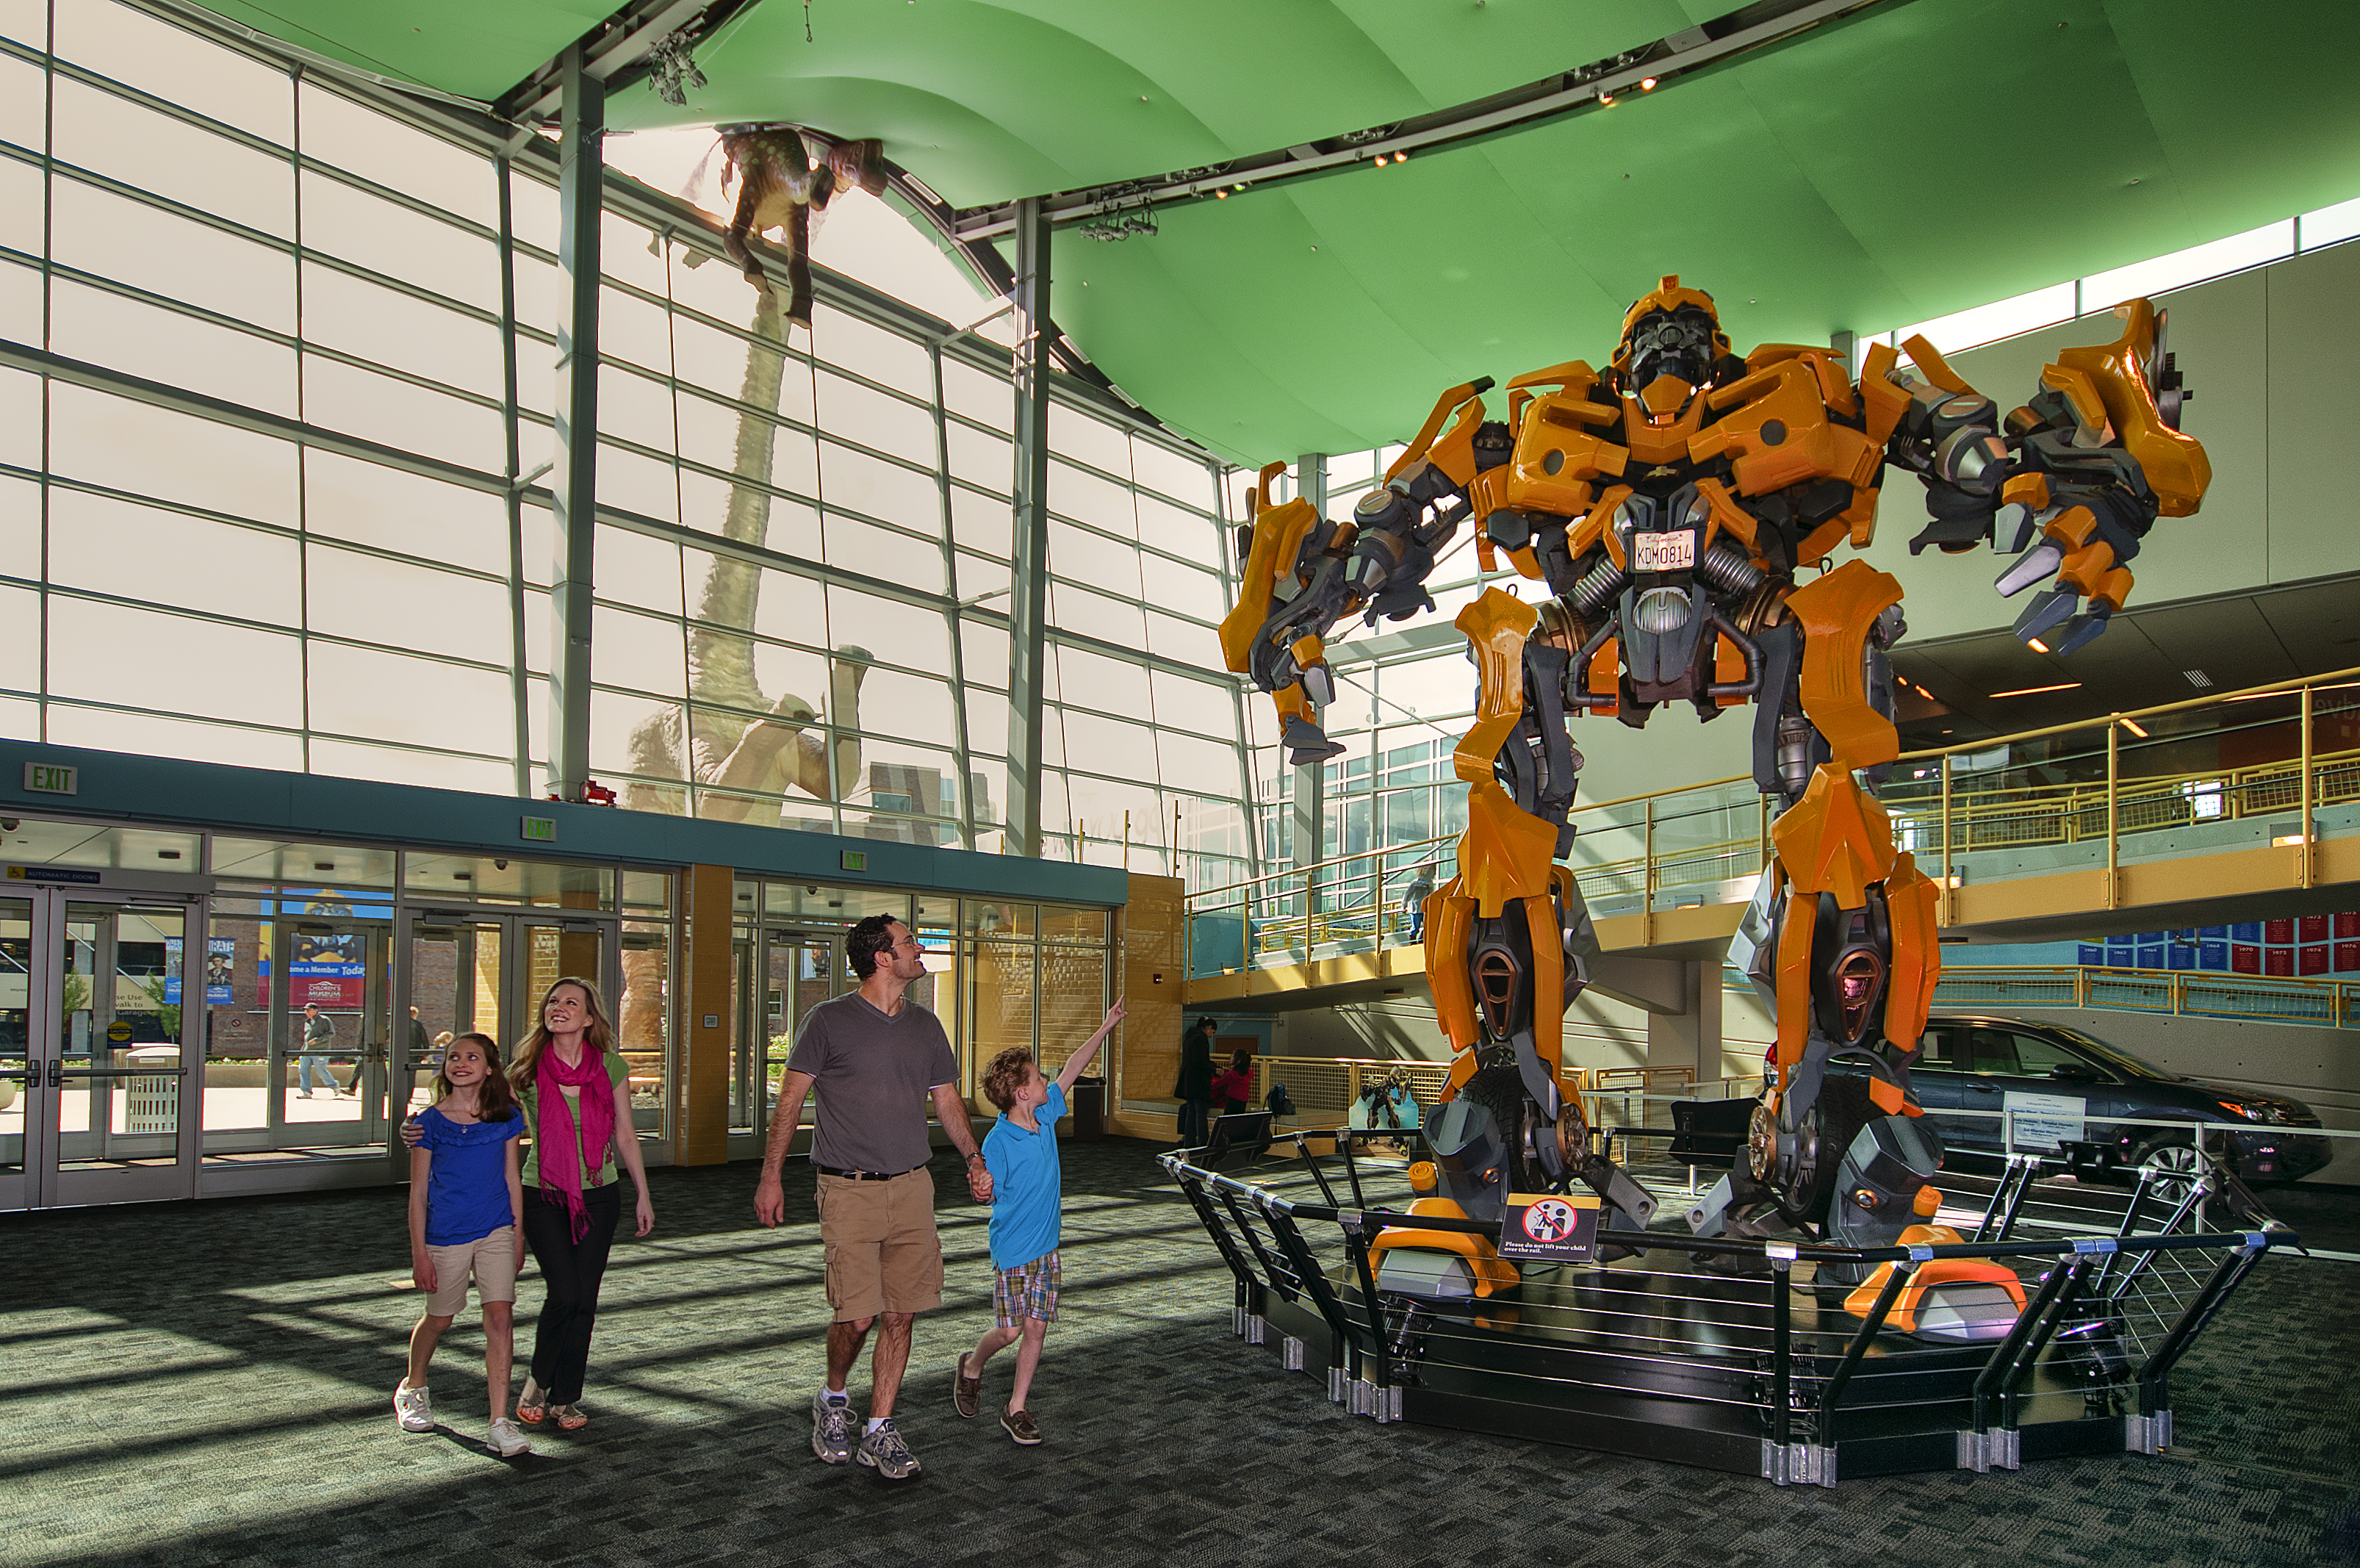 Transformers roll out at the Indianapolis Children’s Museum